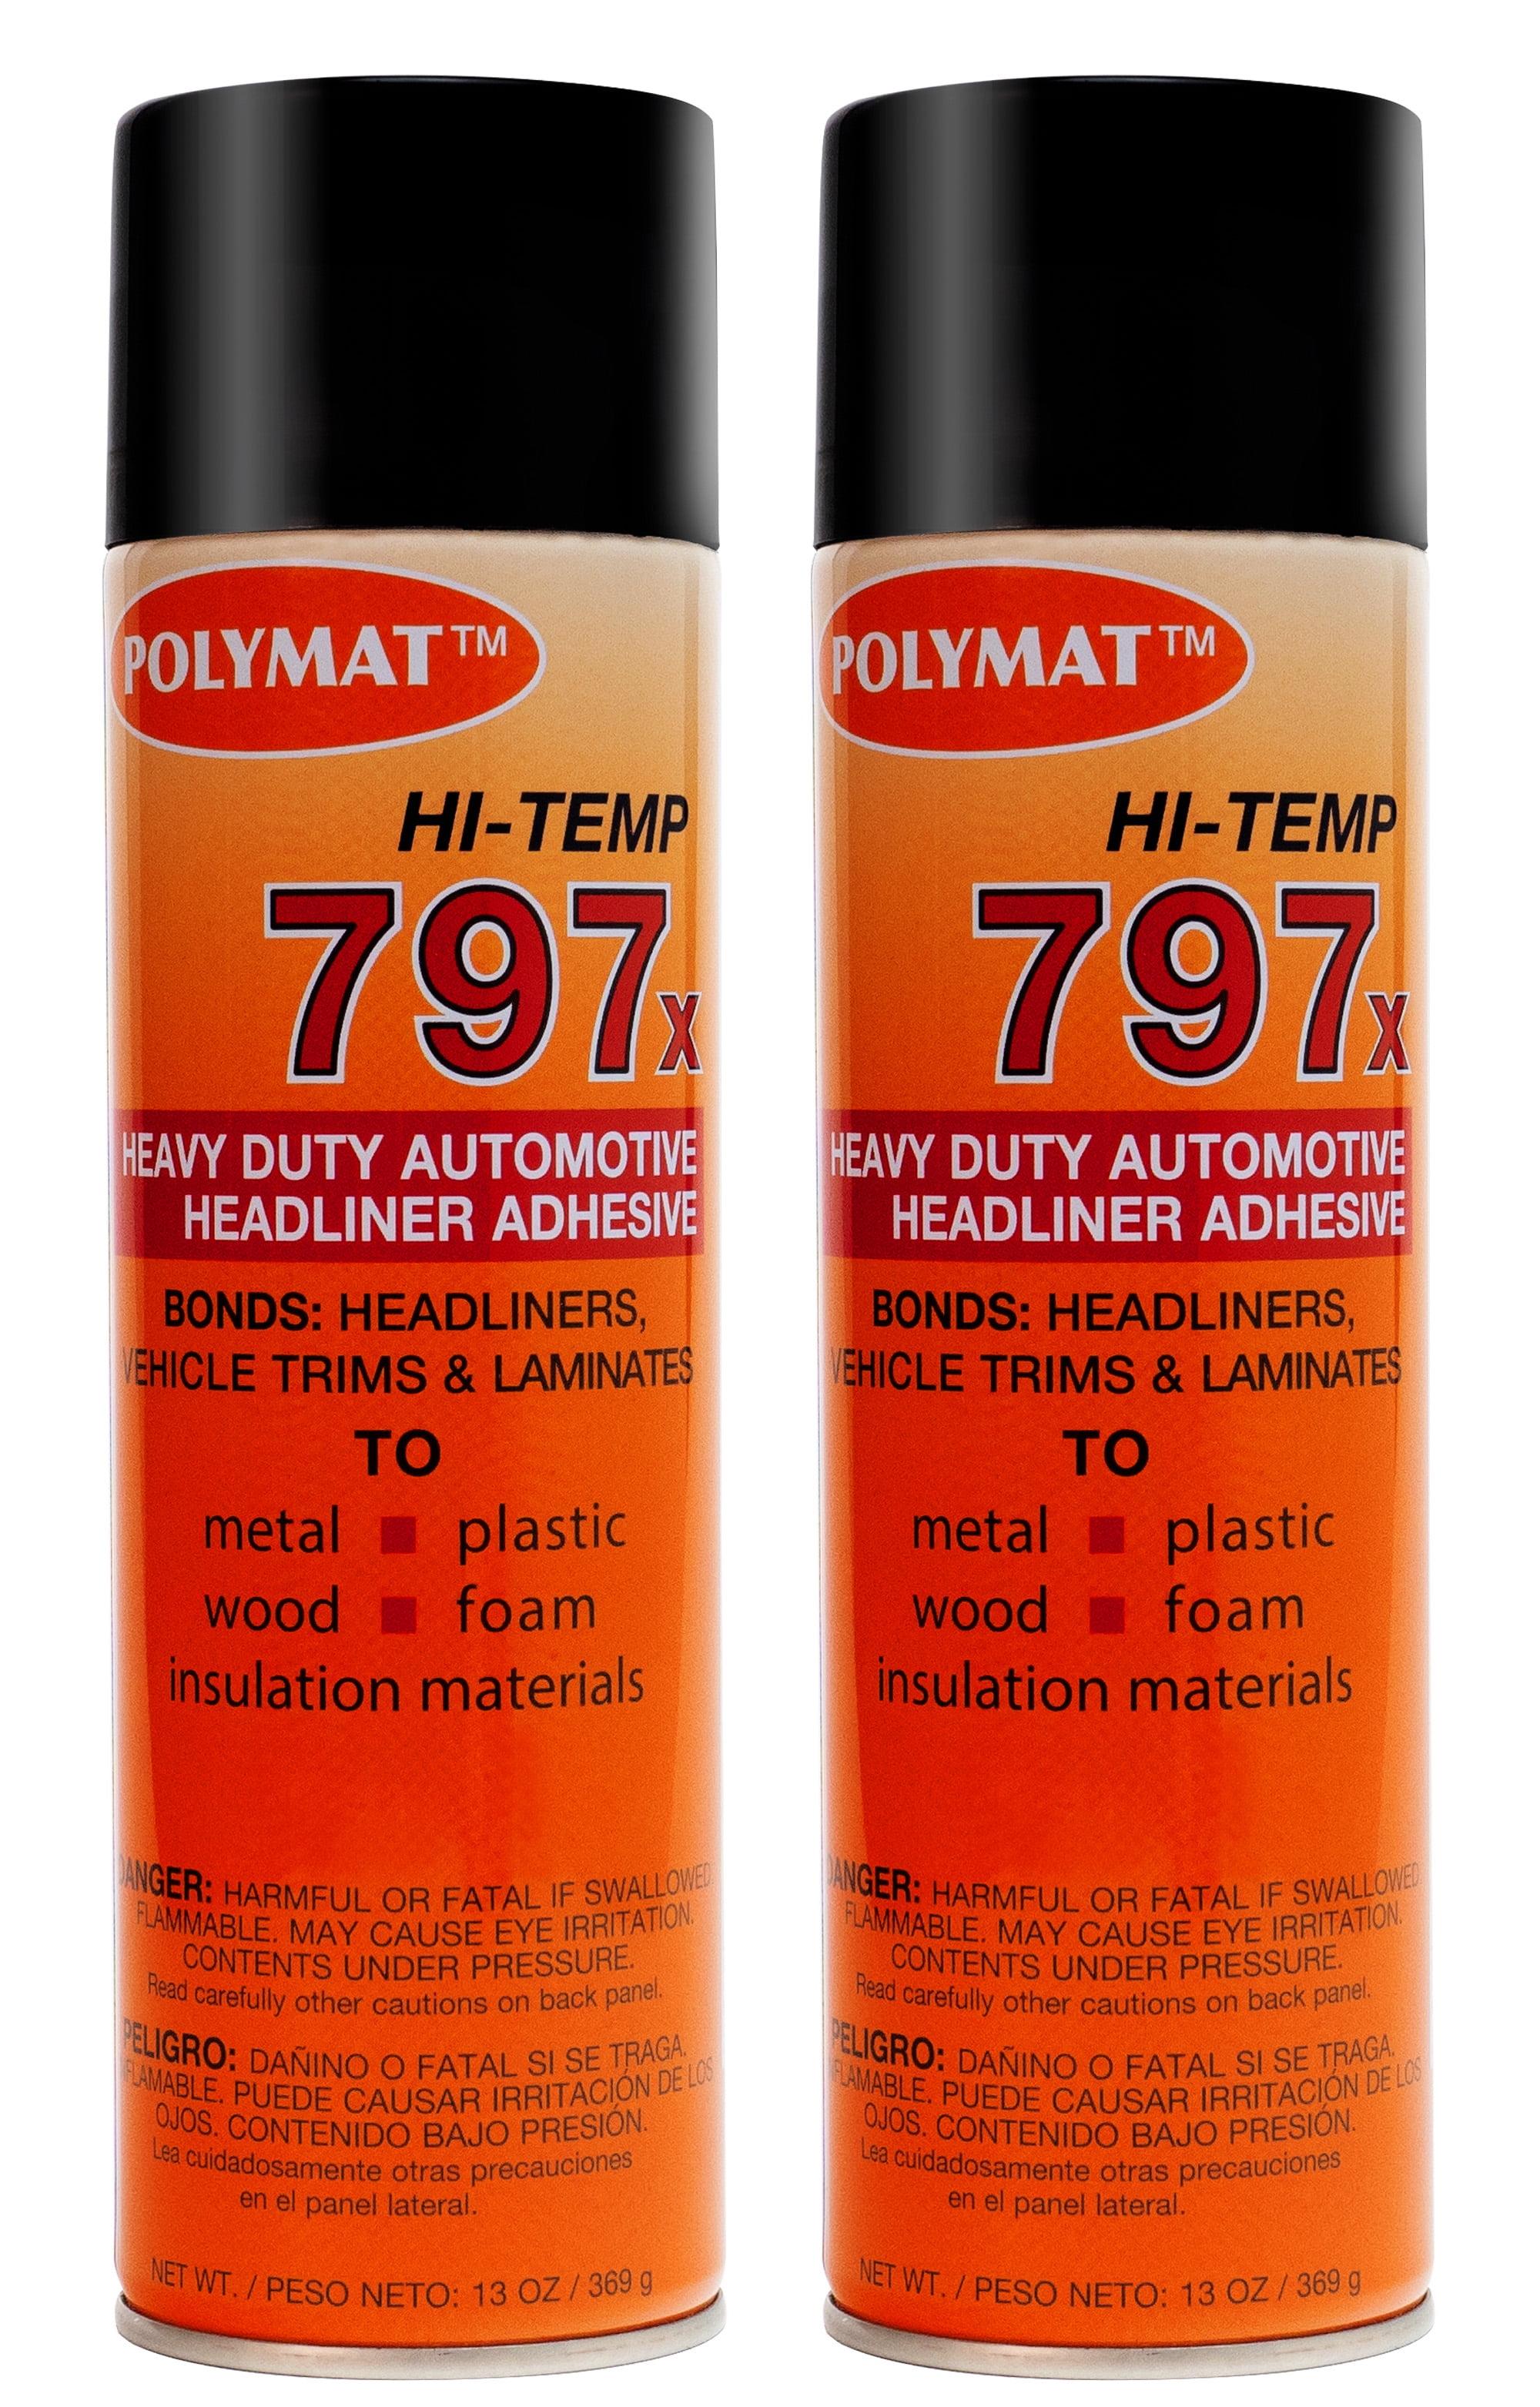 3M™ Foam and Fabric Spray Adhesive 24, Orange, 16 fl oz Can (Net Wt 13.8  oz), 12/Case, NOT FOR SALE IN CA AND OTHER STATES